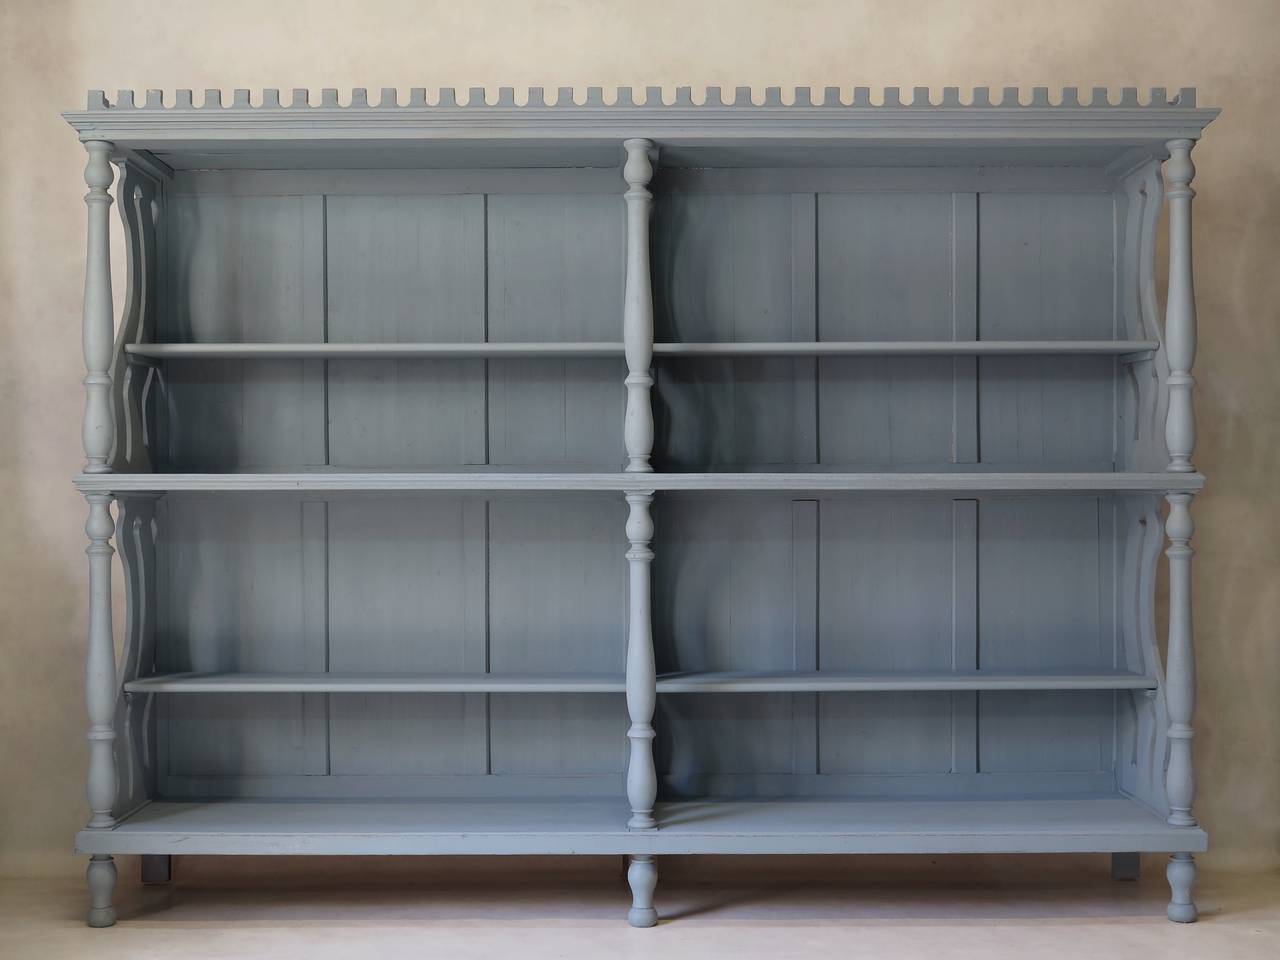 Elegant and unusual Art Nouveau bookcase, painted a soft blue/grey. Wavy cutout detail, columns and a crenellated cornice. 

Additional shelving can be easily added if necessary.